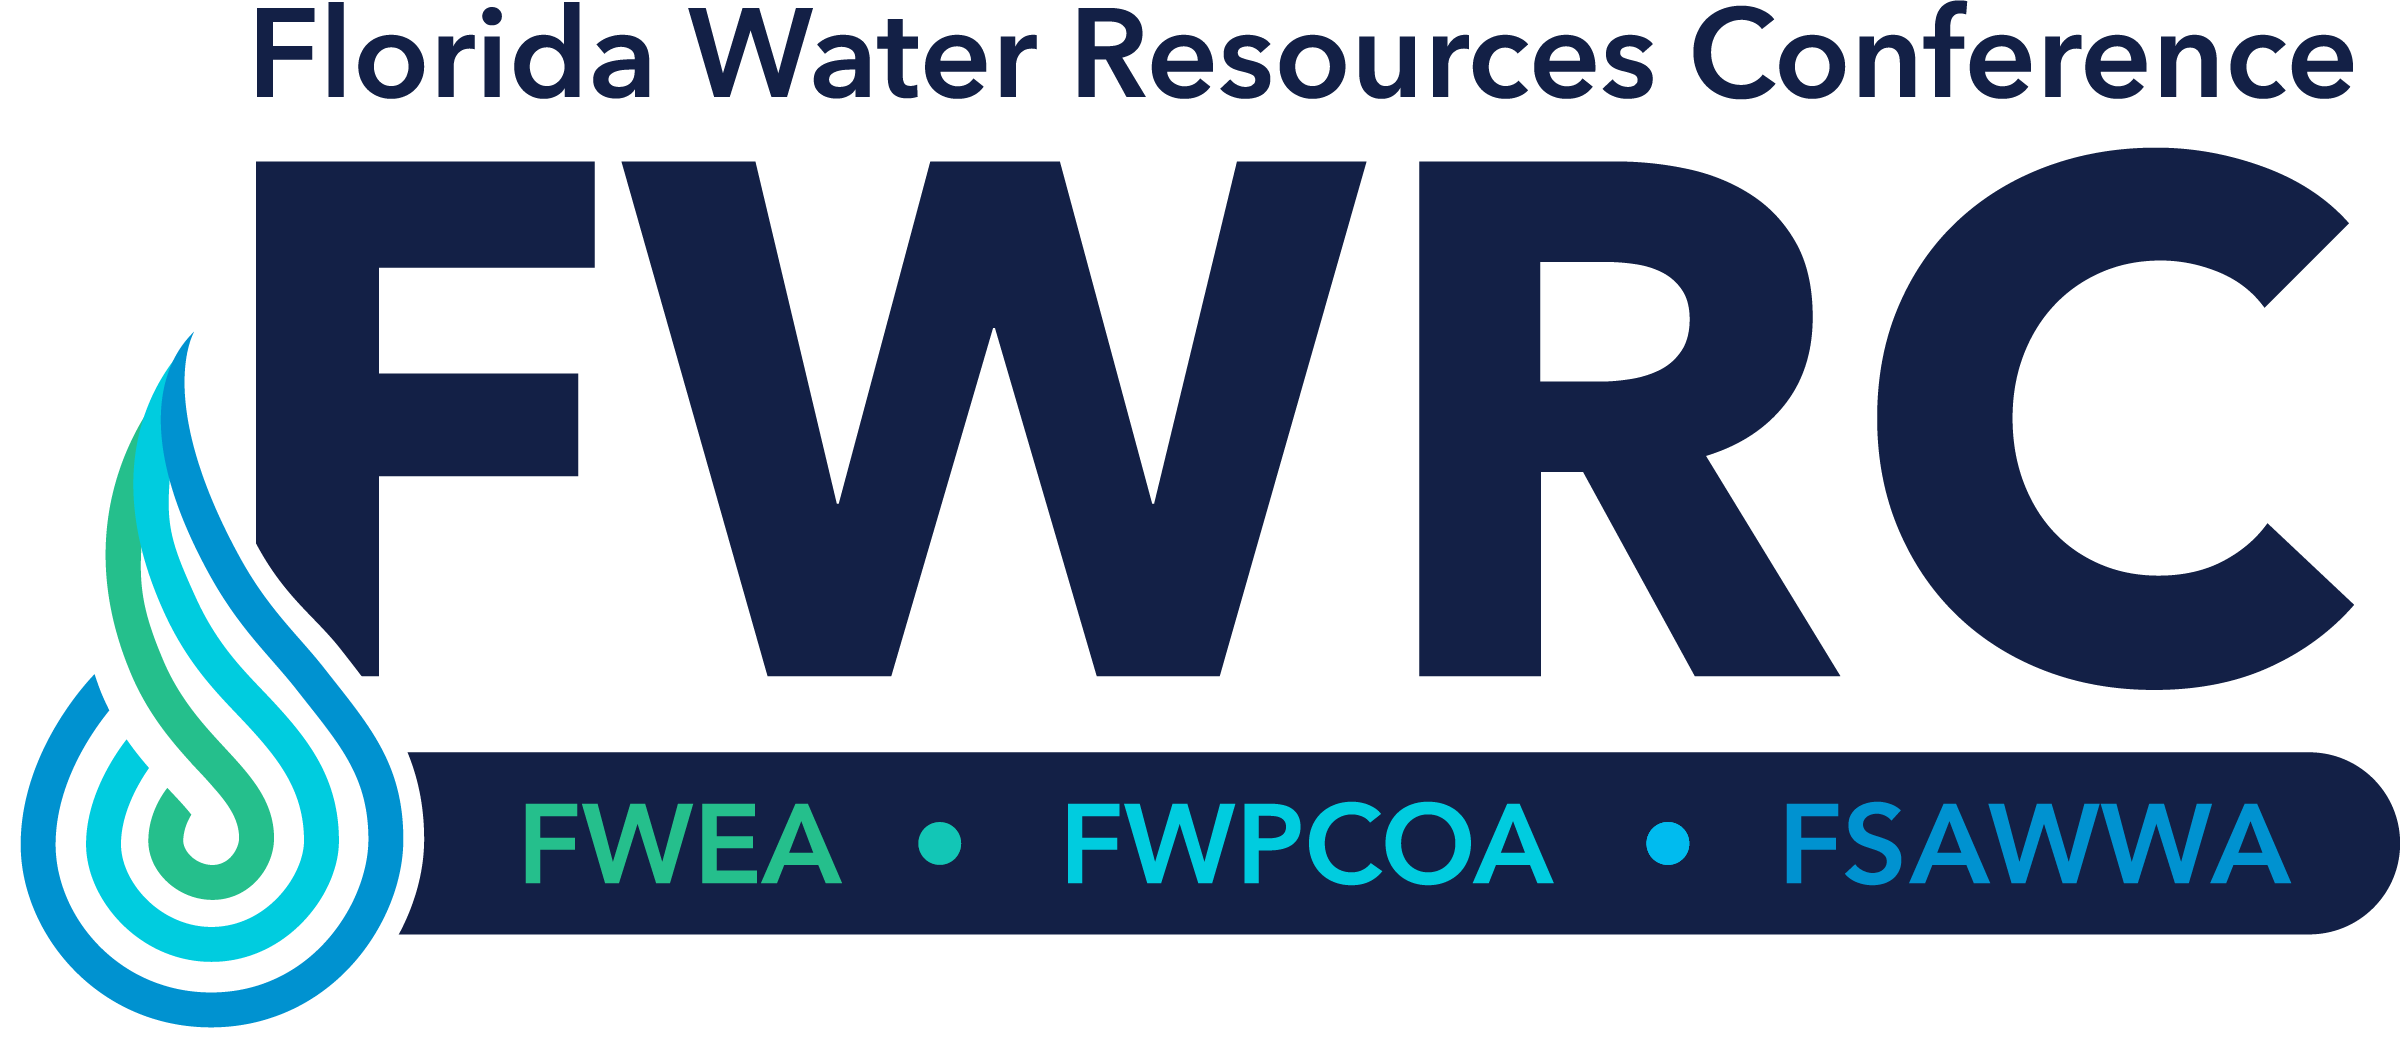 Annual Conference - Florida Water Environment Association